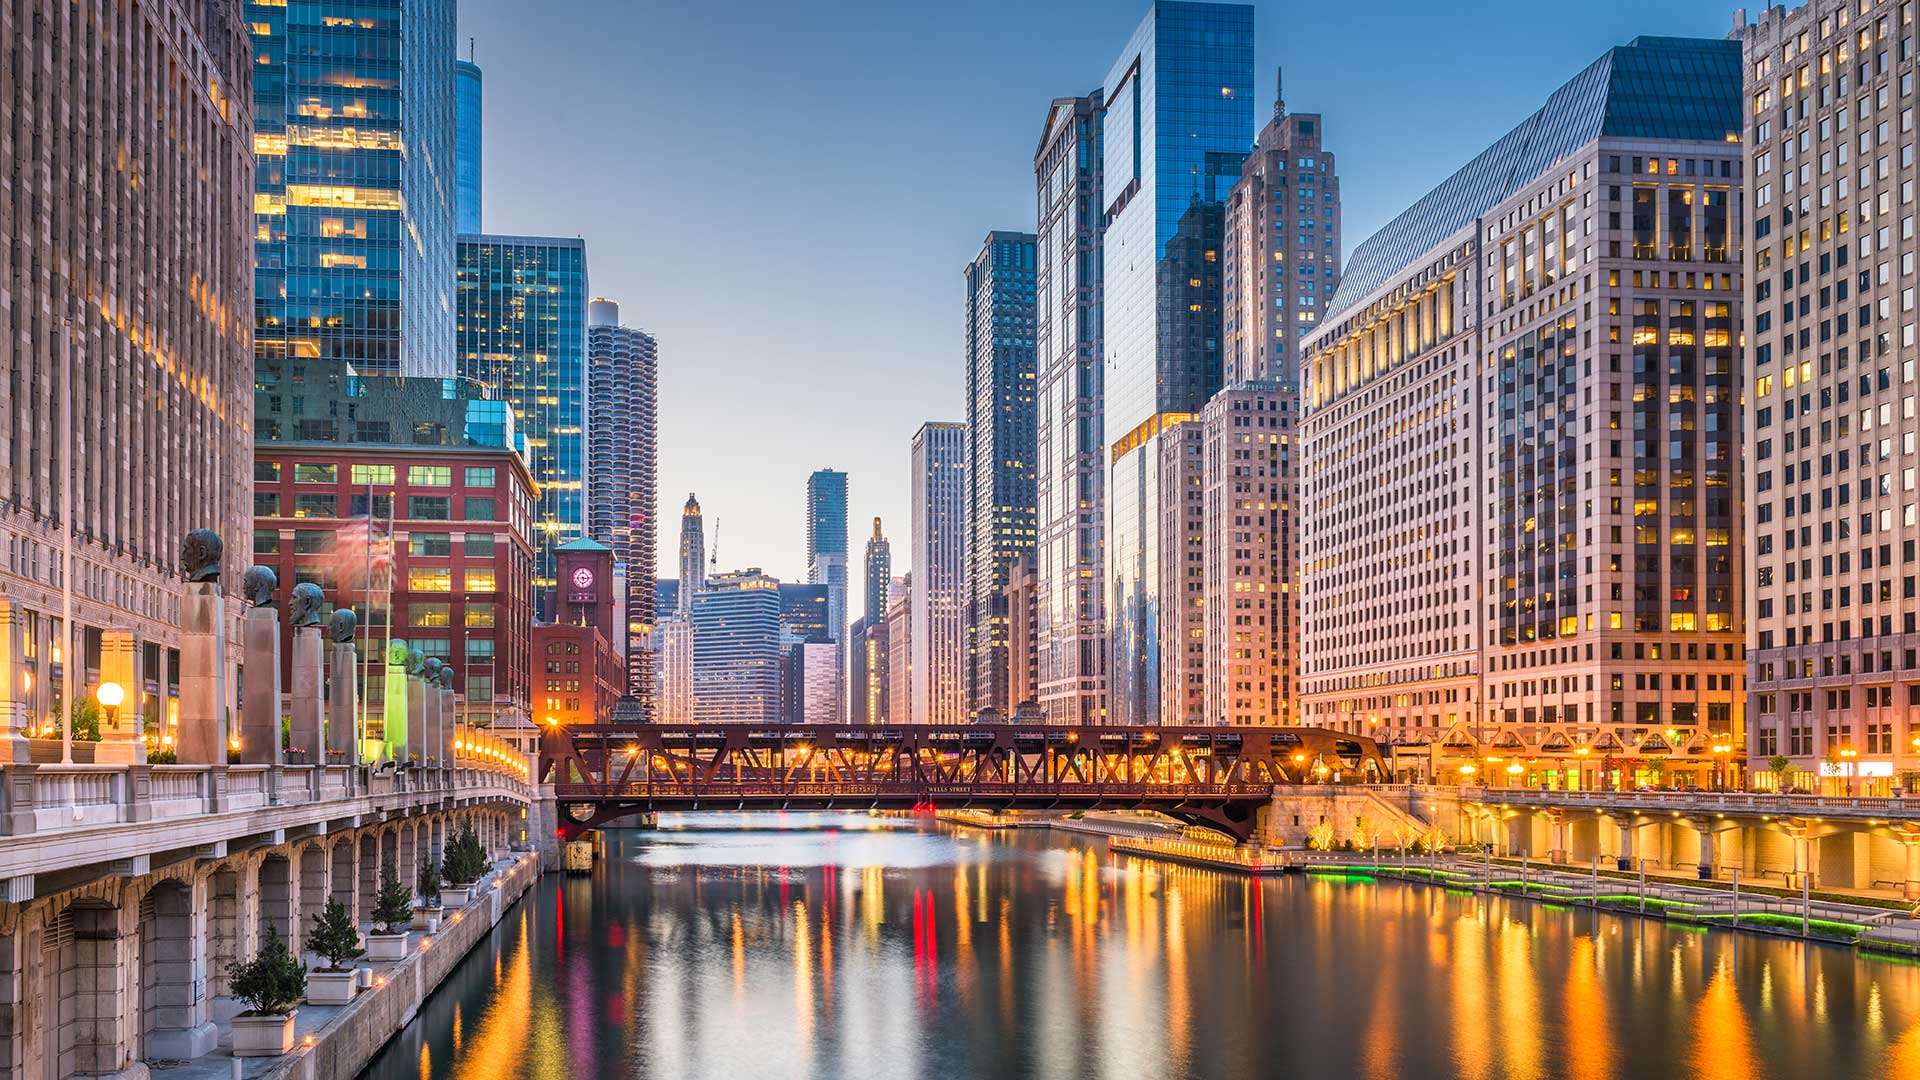 Looking down along the Chicago River at dusk. City lights are coming on, so the river reflects the many colors of those lights. Buildings rise all around the river on a clear evening.